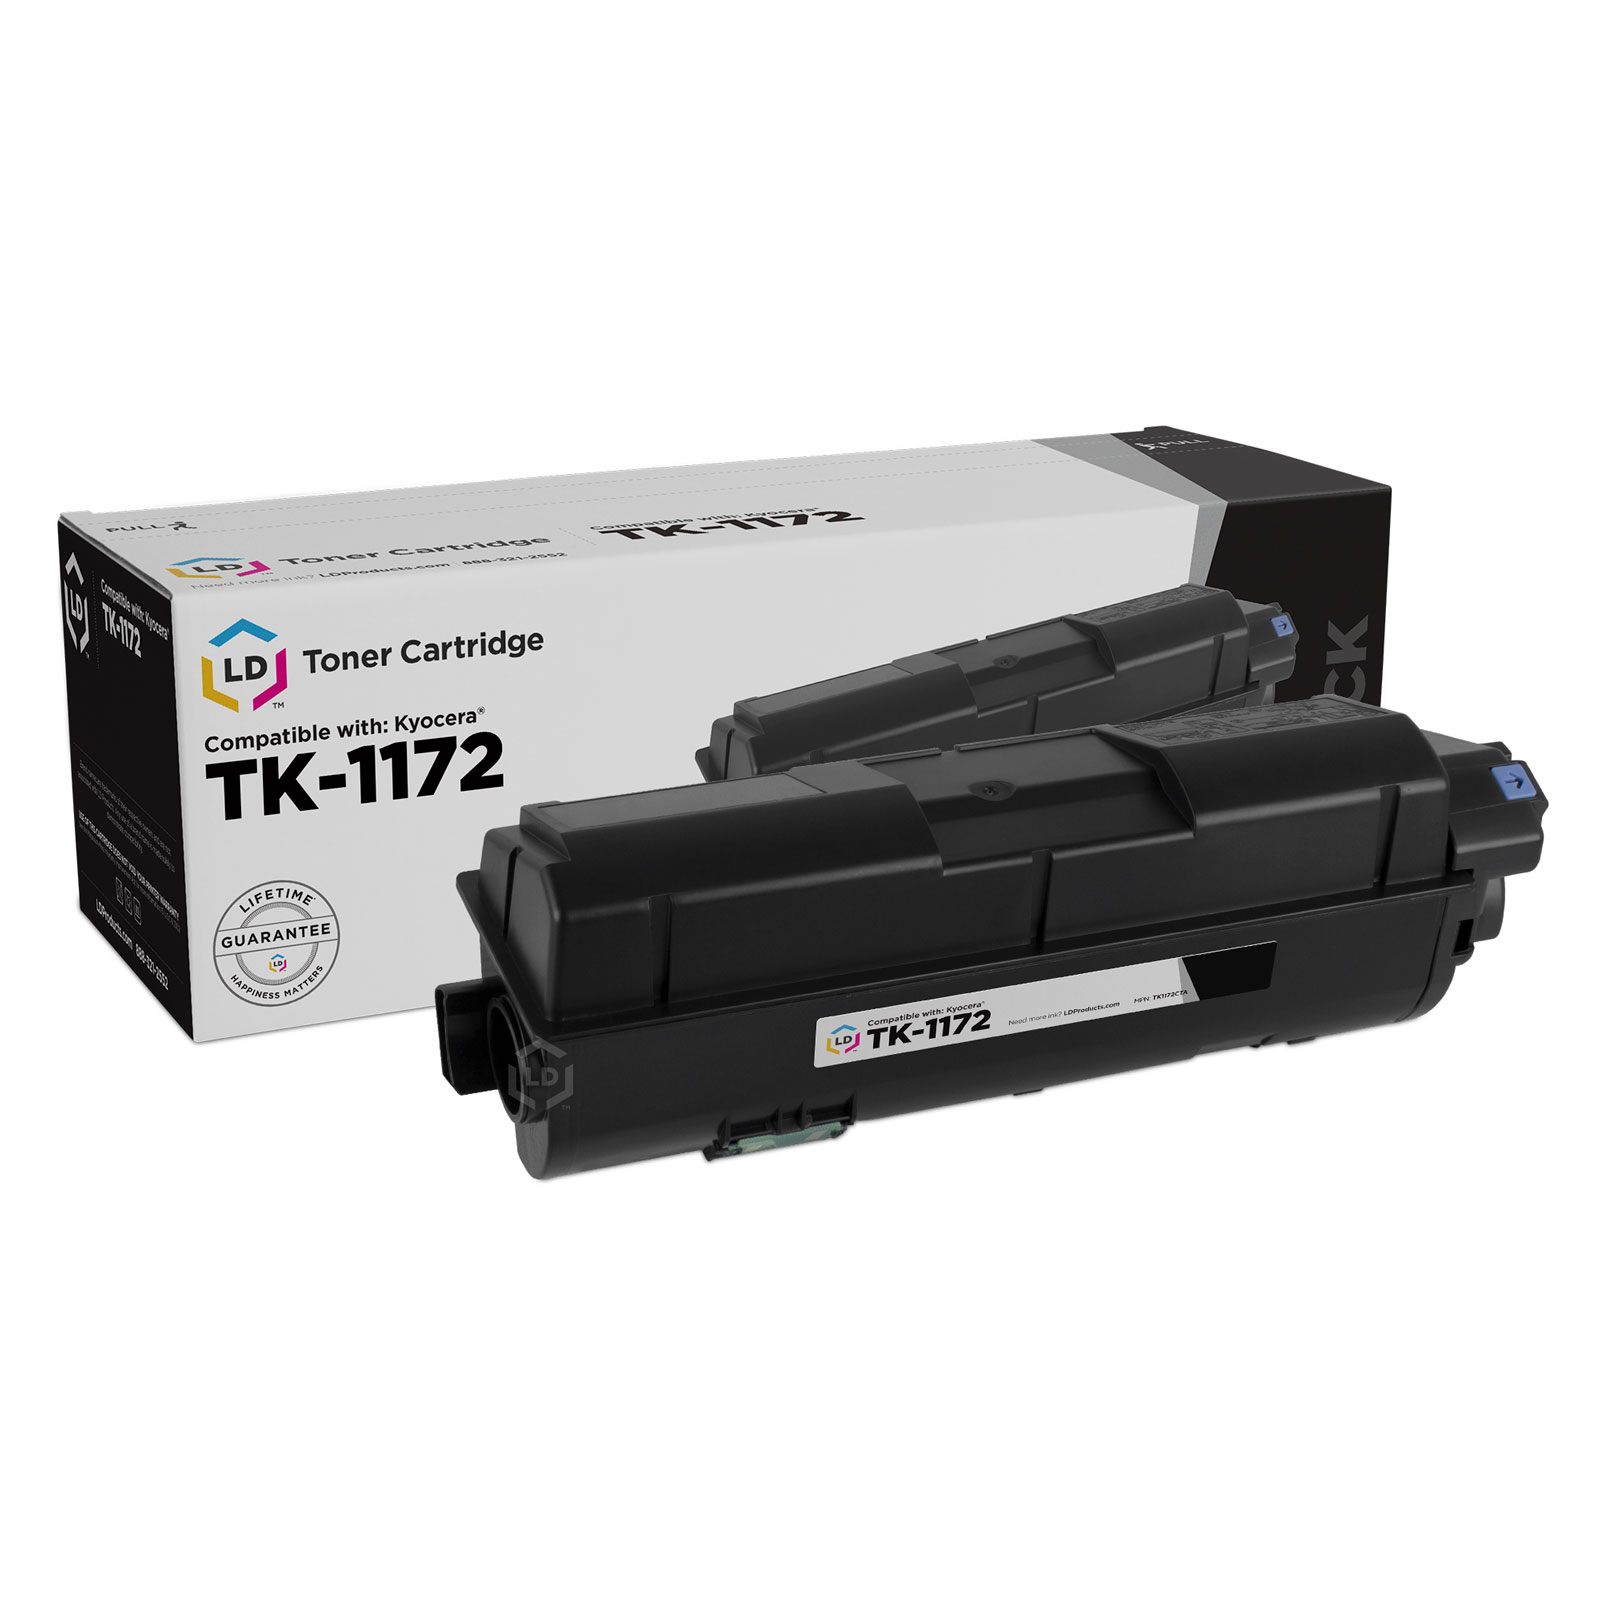 LD Compatible Replacement for Kyocera TK-1172 (1T02S50US0) Black Laser Toner Cartridge for use in M2040dn, M2540d, M2540dw & M2640idw - image 2 of 2